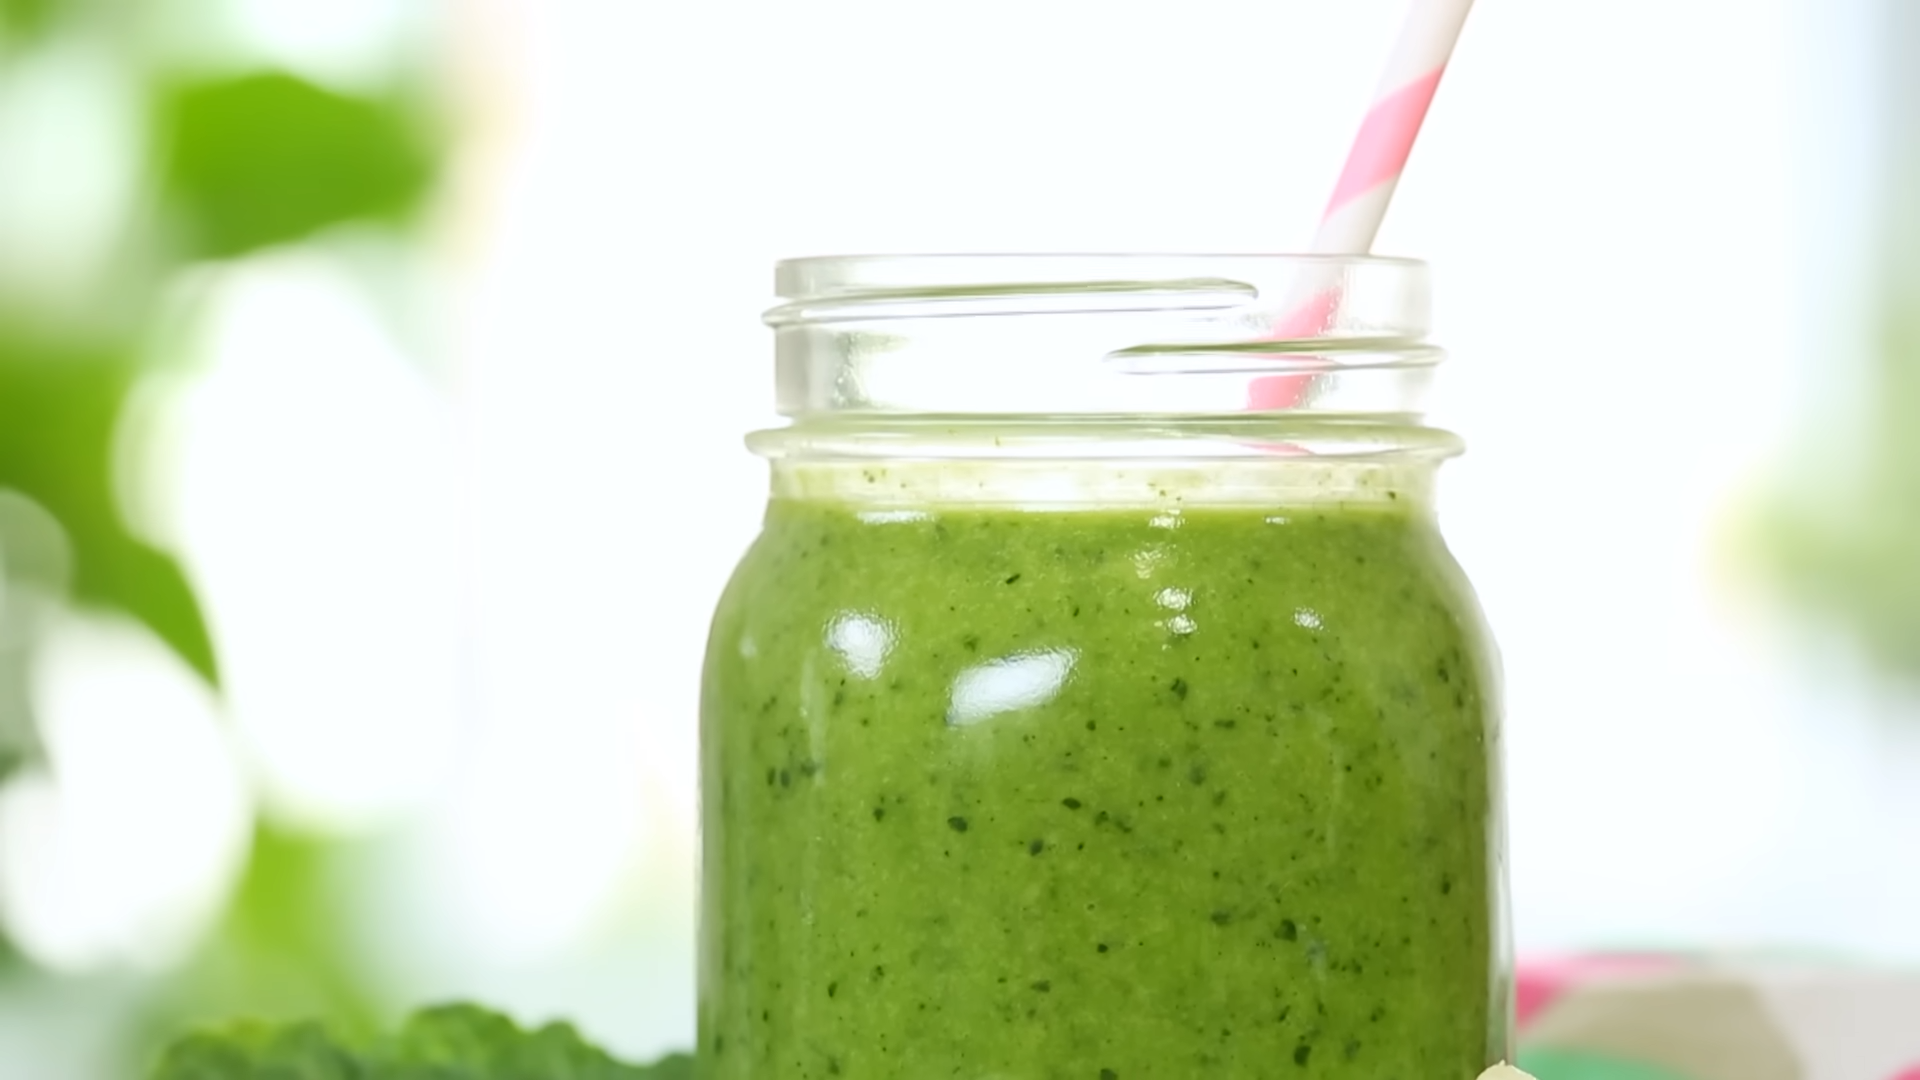 A Vibrant Green Smoothie in A Clear Glass